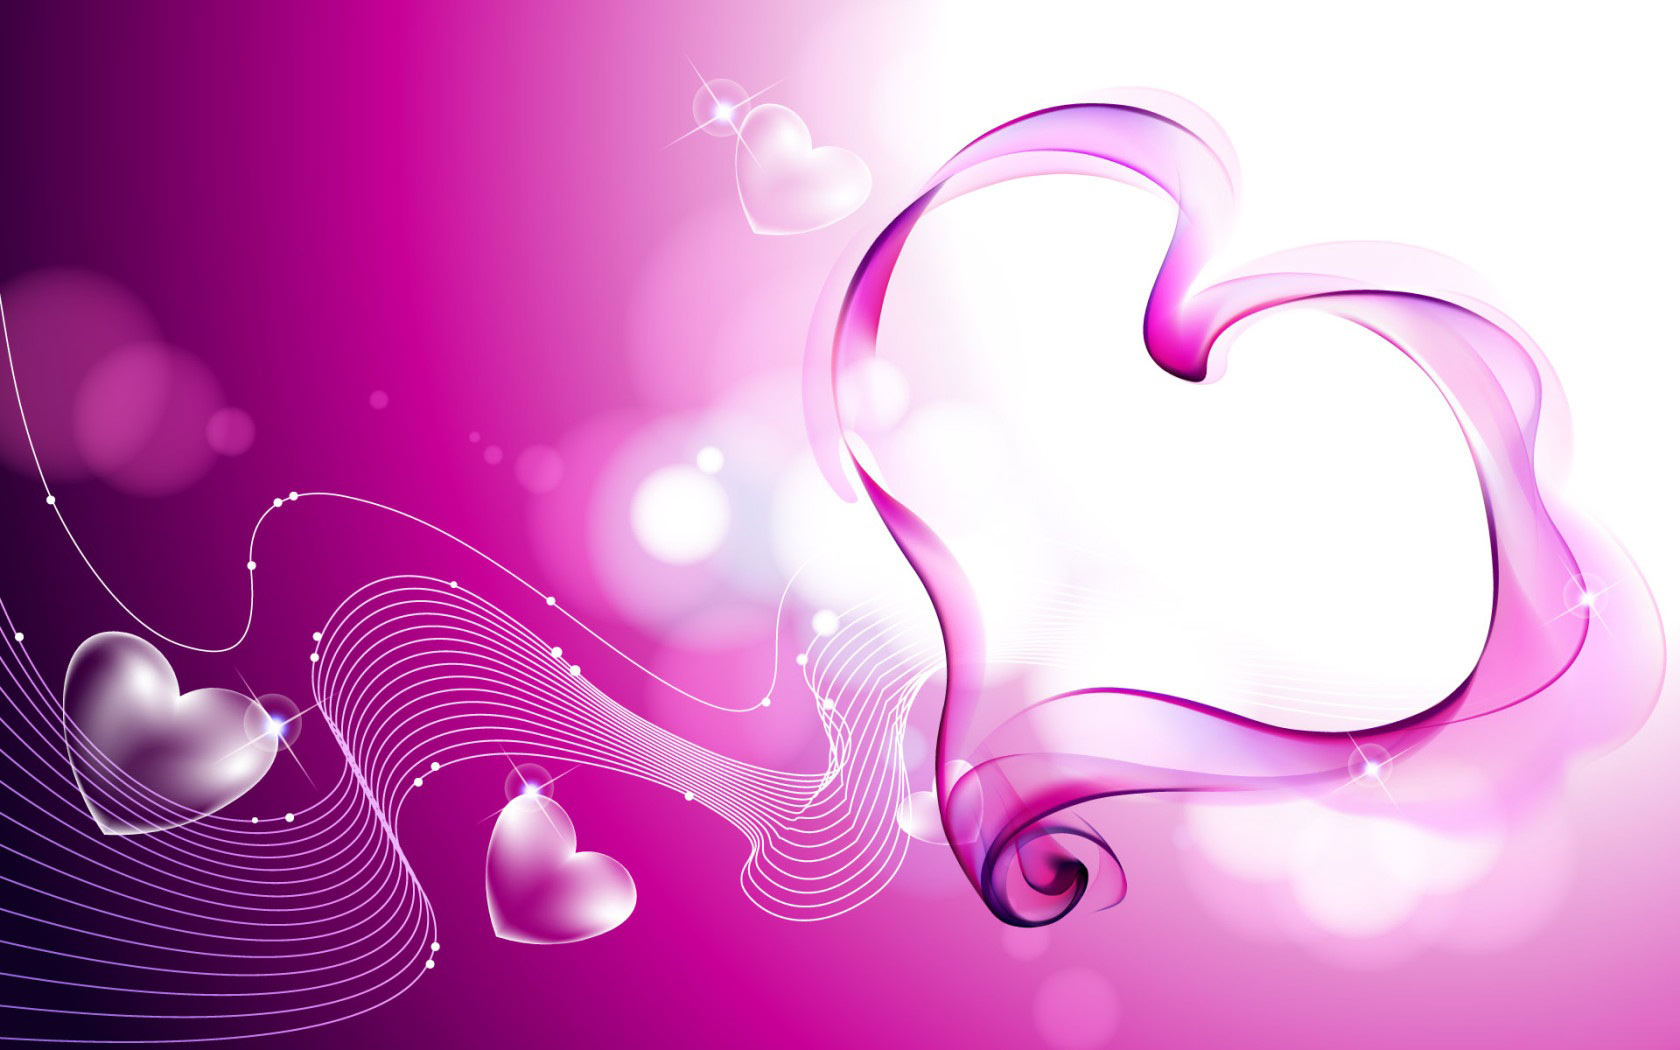 Love Hearts Valentine Background Animated Romantic Wallpaper For